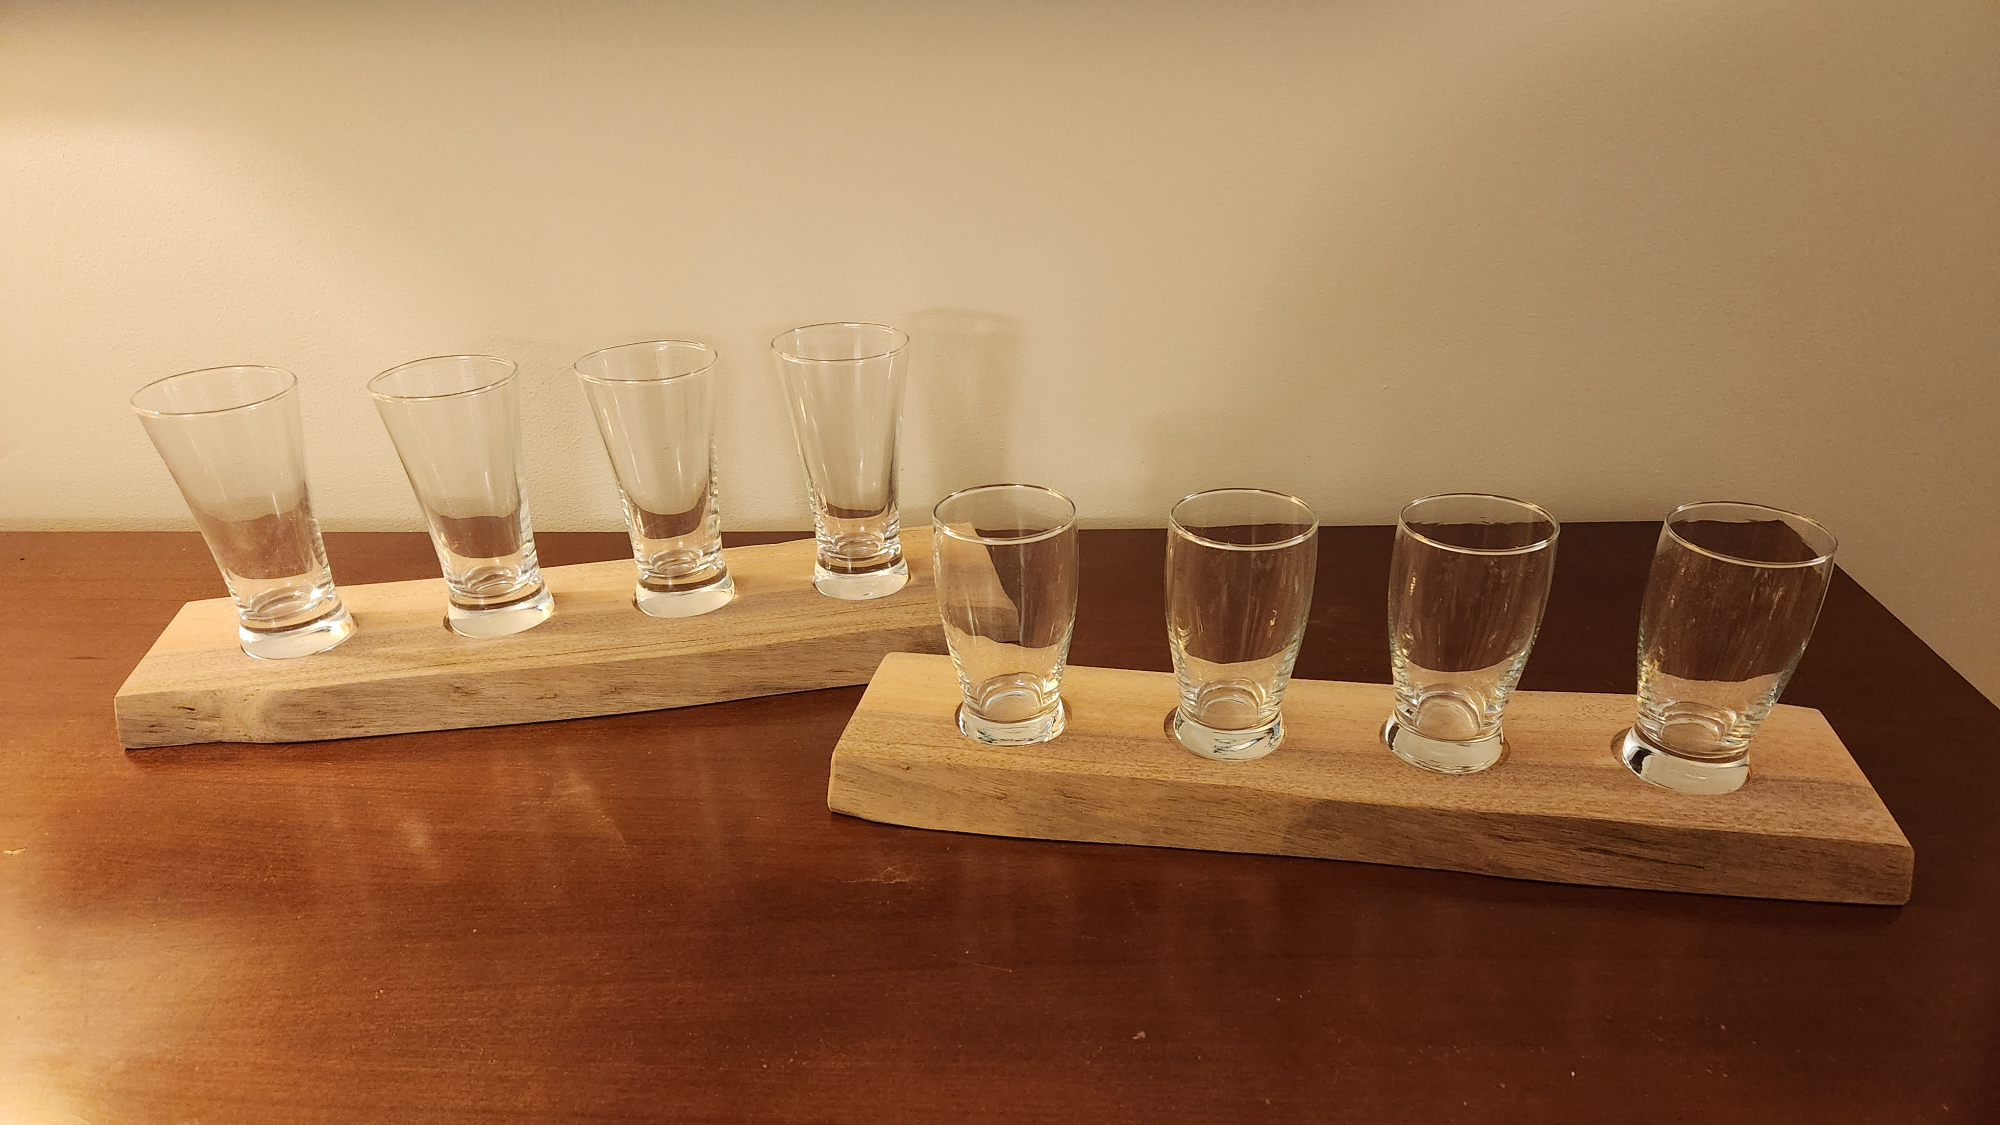 Two light-colored live edge DIY beer flight boards with four glasses each, on a darker wood surface in front of a beige wall.